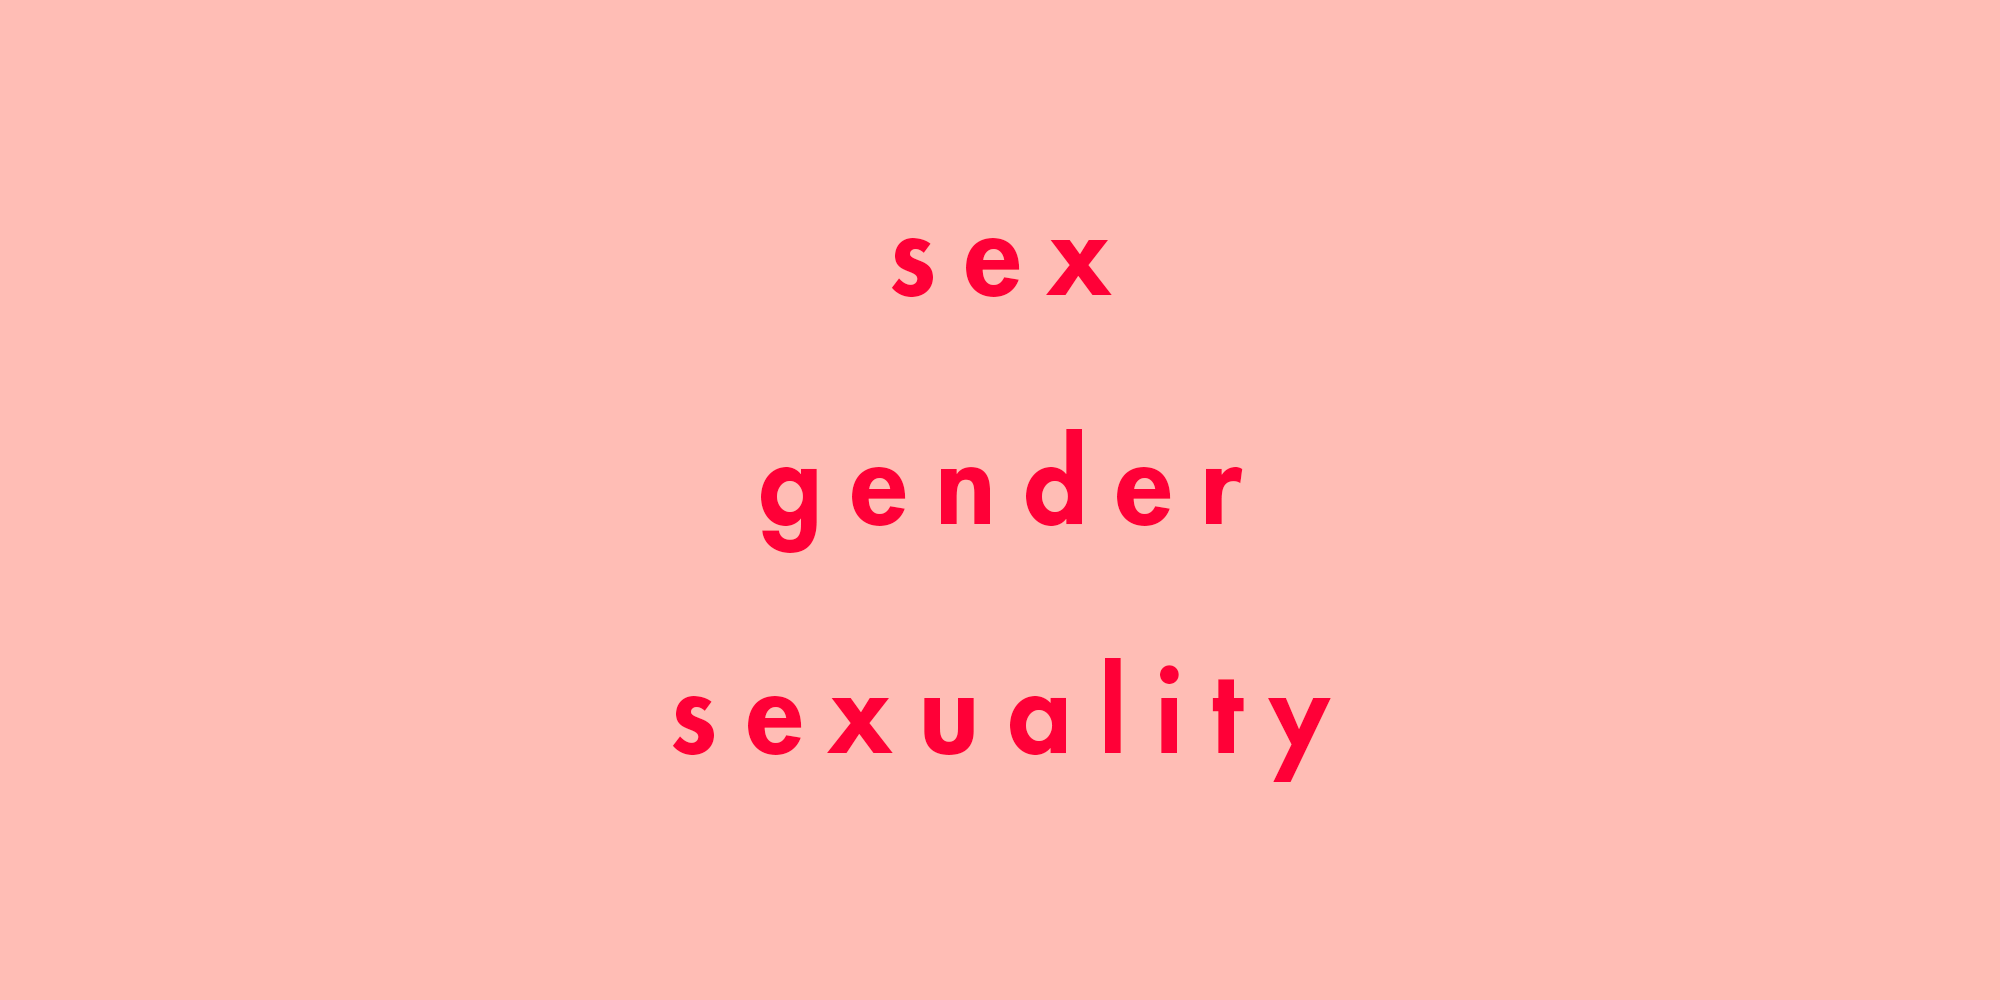 And gender sexuality difference sex between Biological Sex,